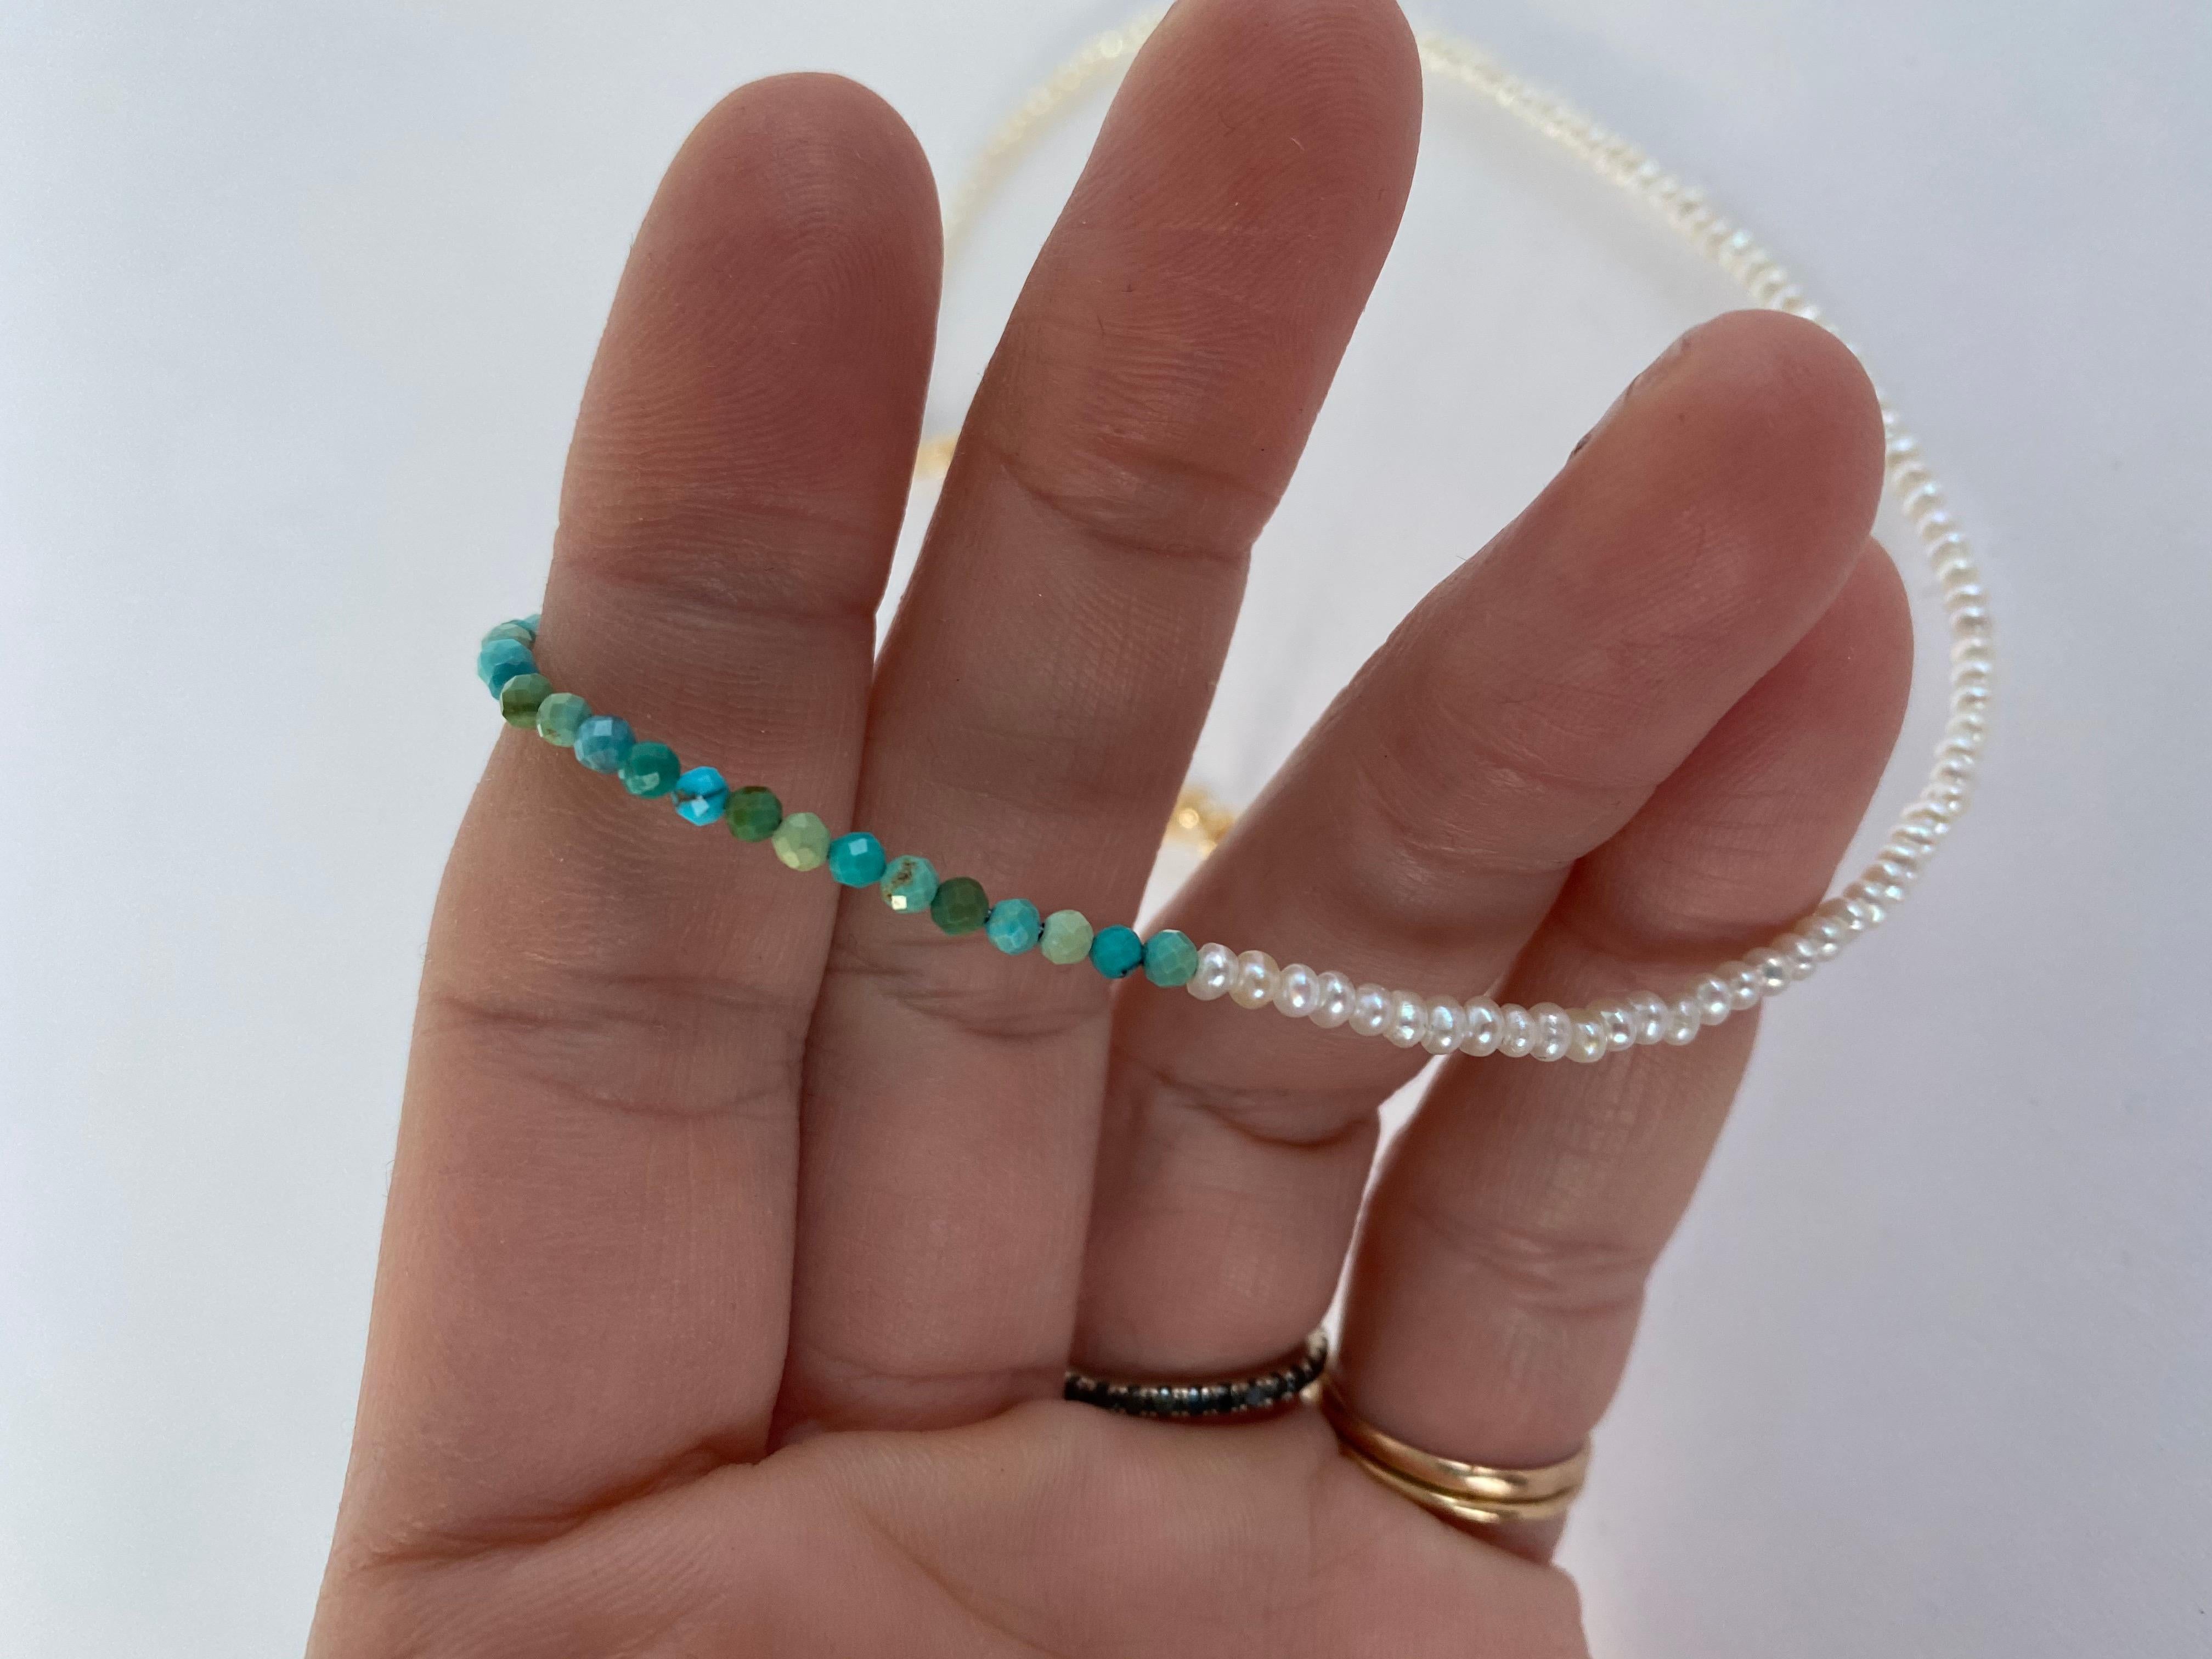 Turquoise White Pearl Gold Filled Chain Beaded Ankle Bracelet J Dauphin
can also be used as a bracelet as chain is adjustable

